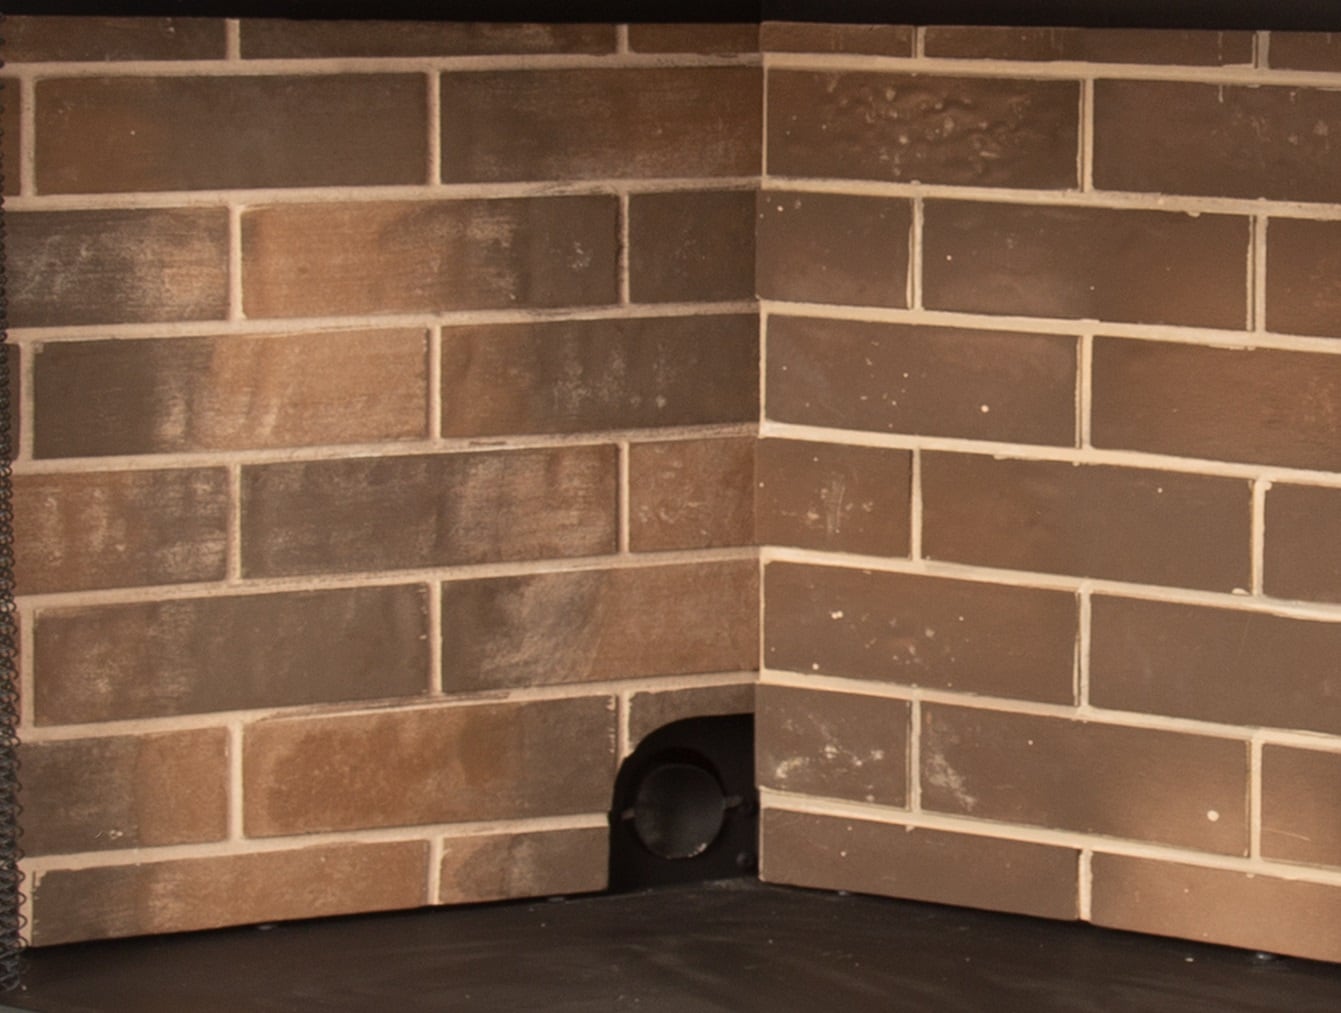 masonry - Replace fire bricks in fireplace - Home Improvement Stack Exchange